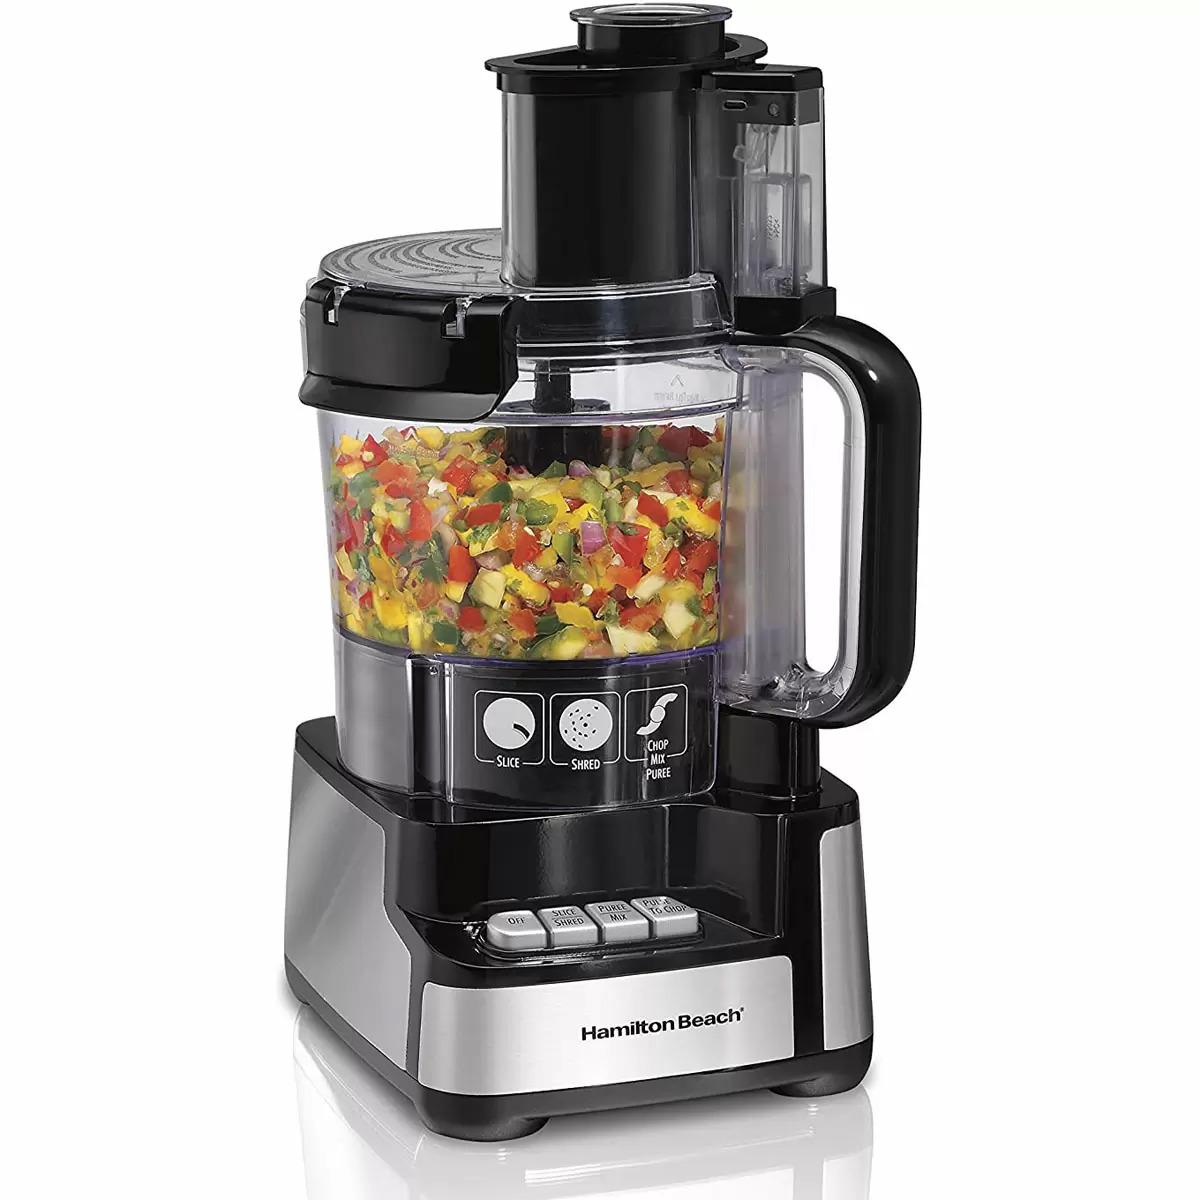 Hamilton Beach 12-Cup Stack Snap Food Processor Vegetable Chopper for $47.99 Shipped